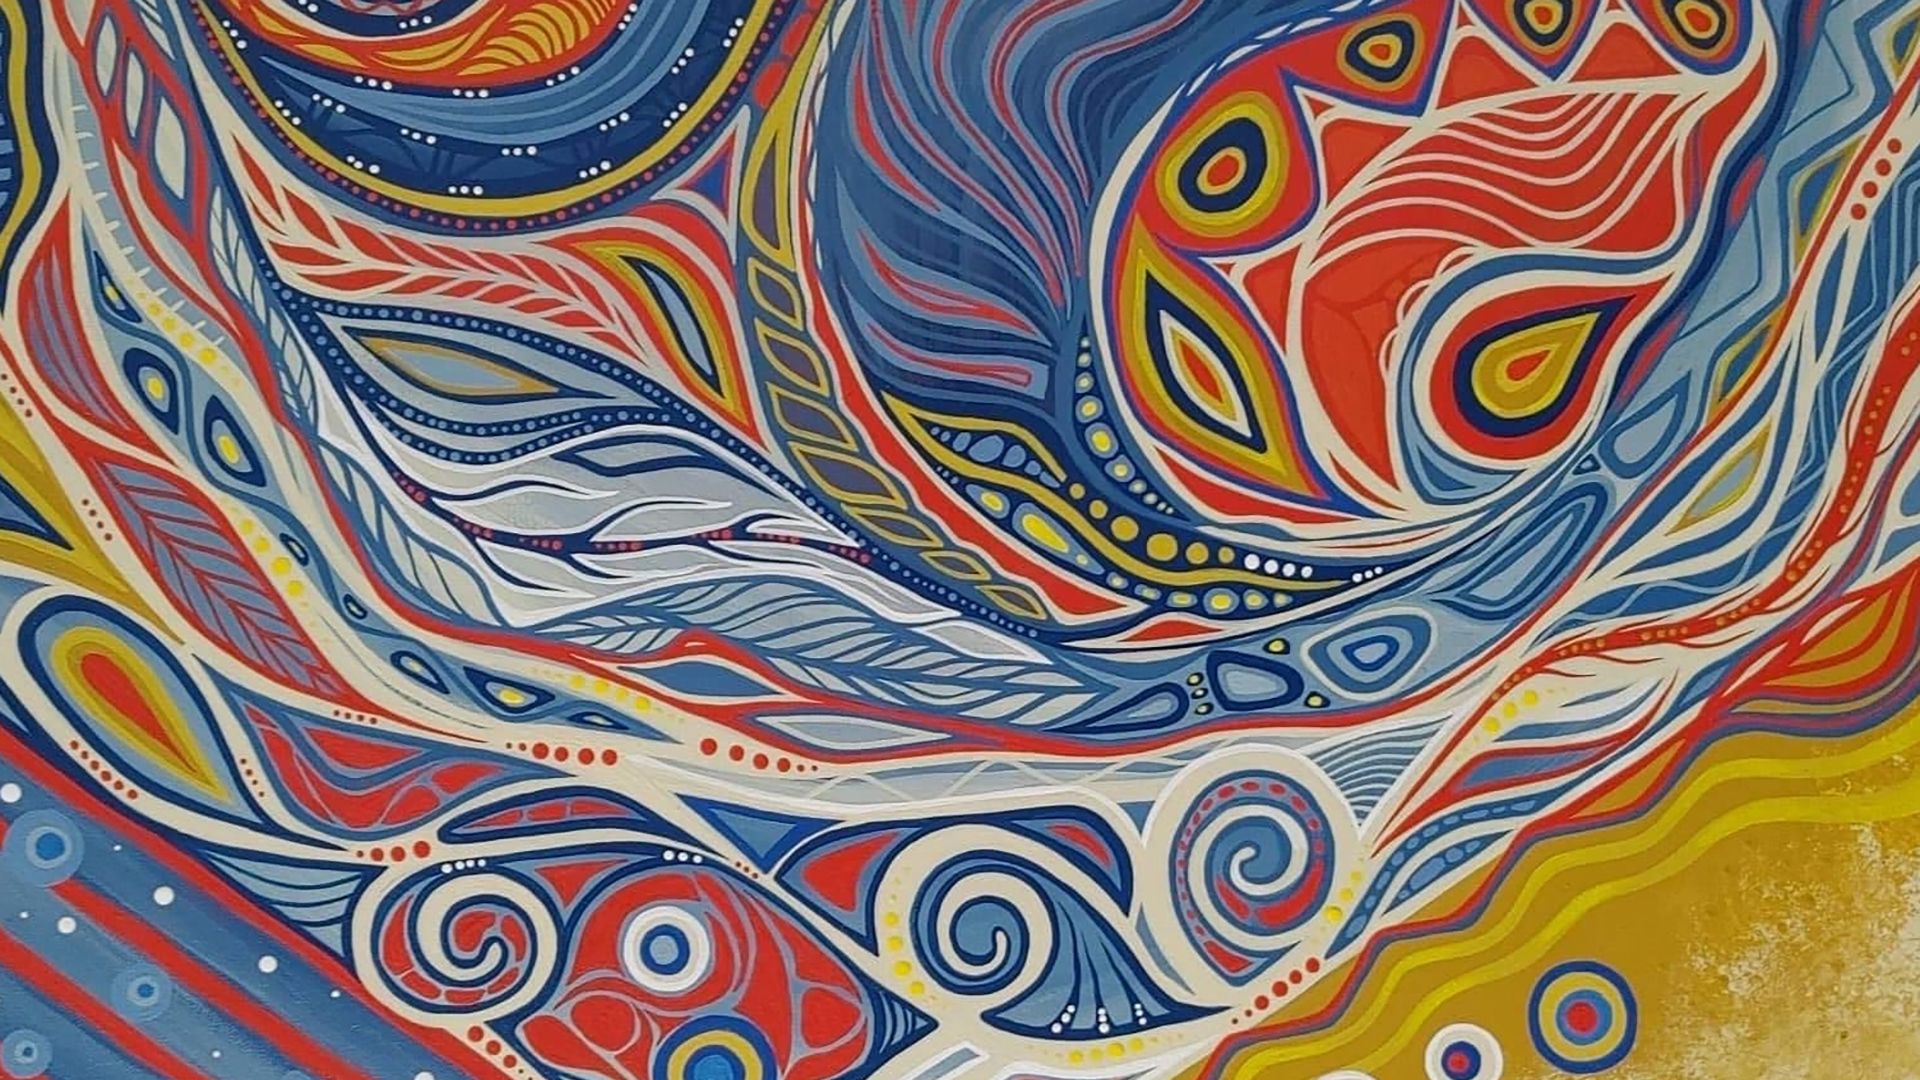 Indigenous artwork titled "My spirit is home", a mix of beautiful colours, fluid lines and shapes